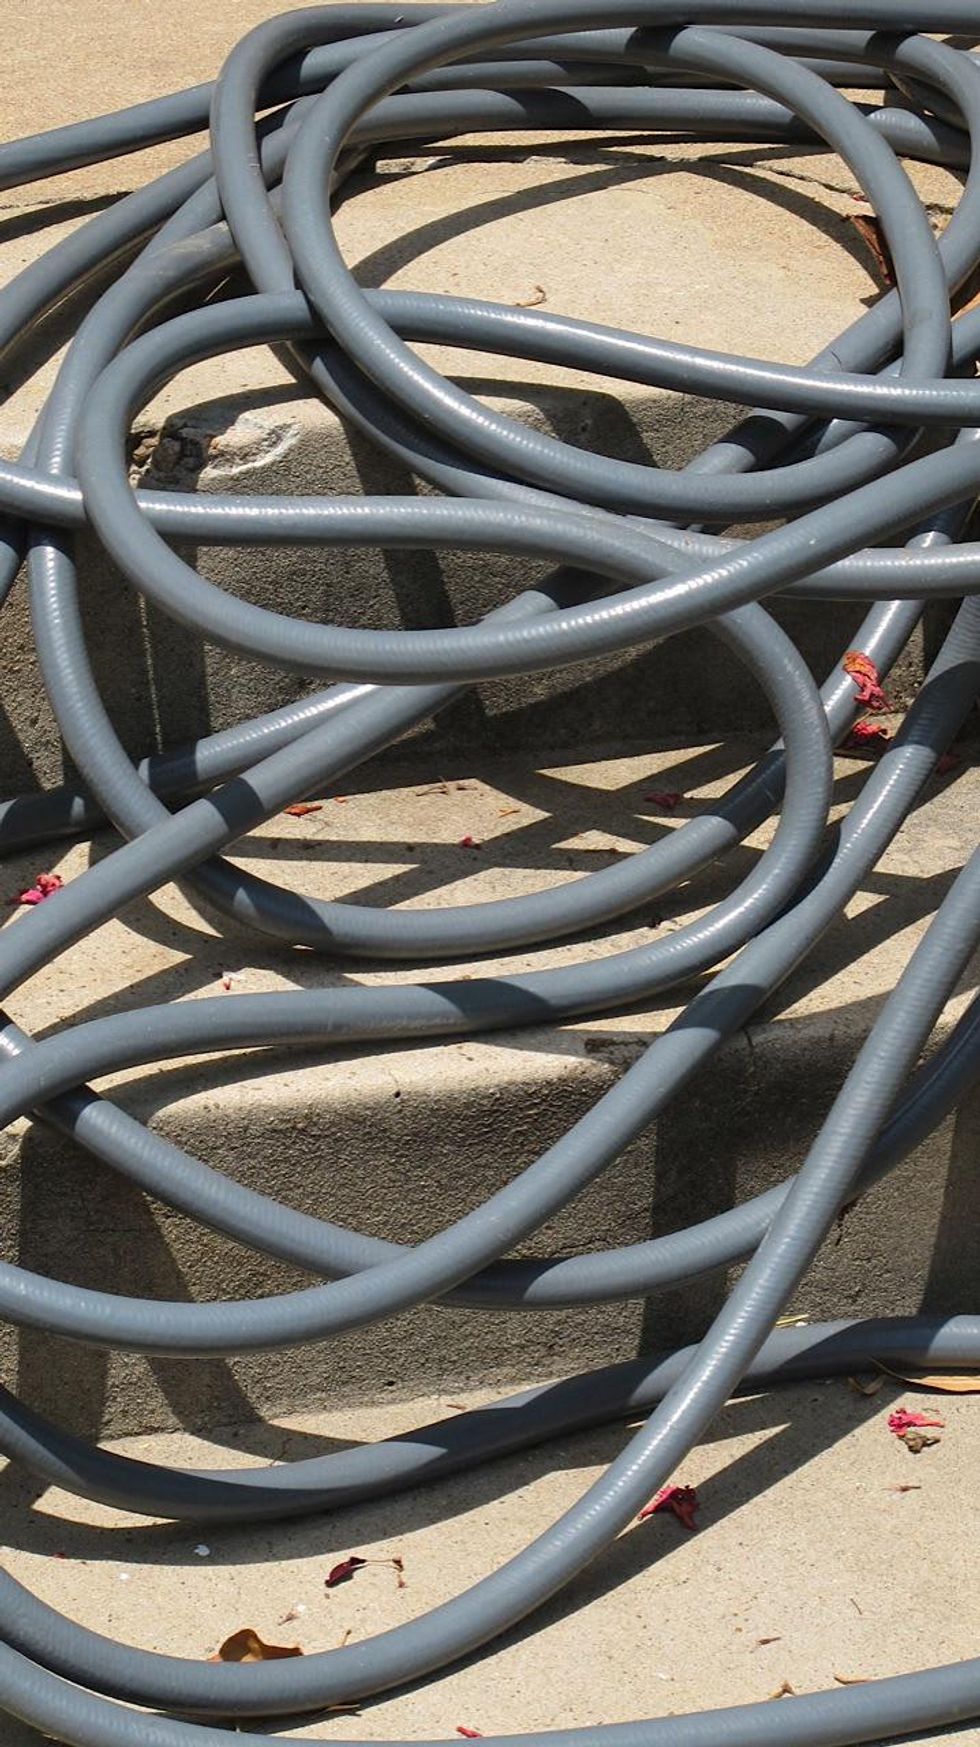 News_Katie_a water hose rogue_May 2012_6_pile of giant, rubber-made spaghetti.jpg